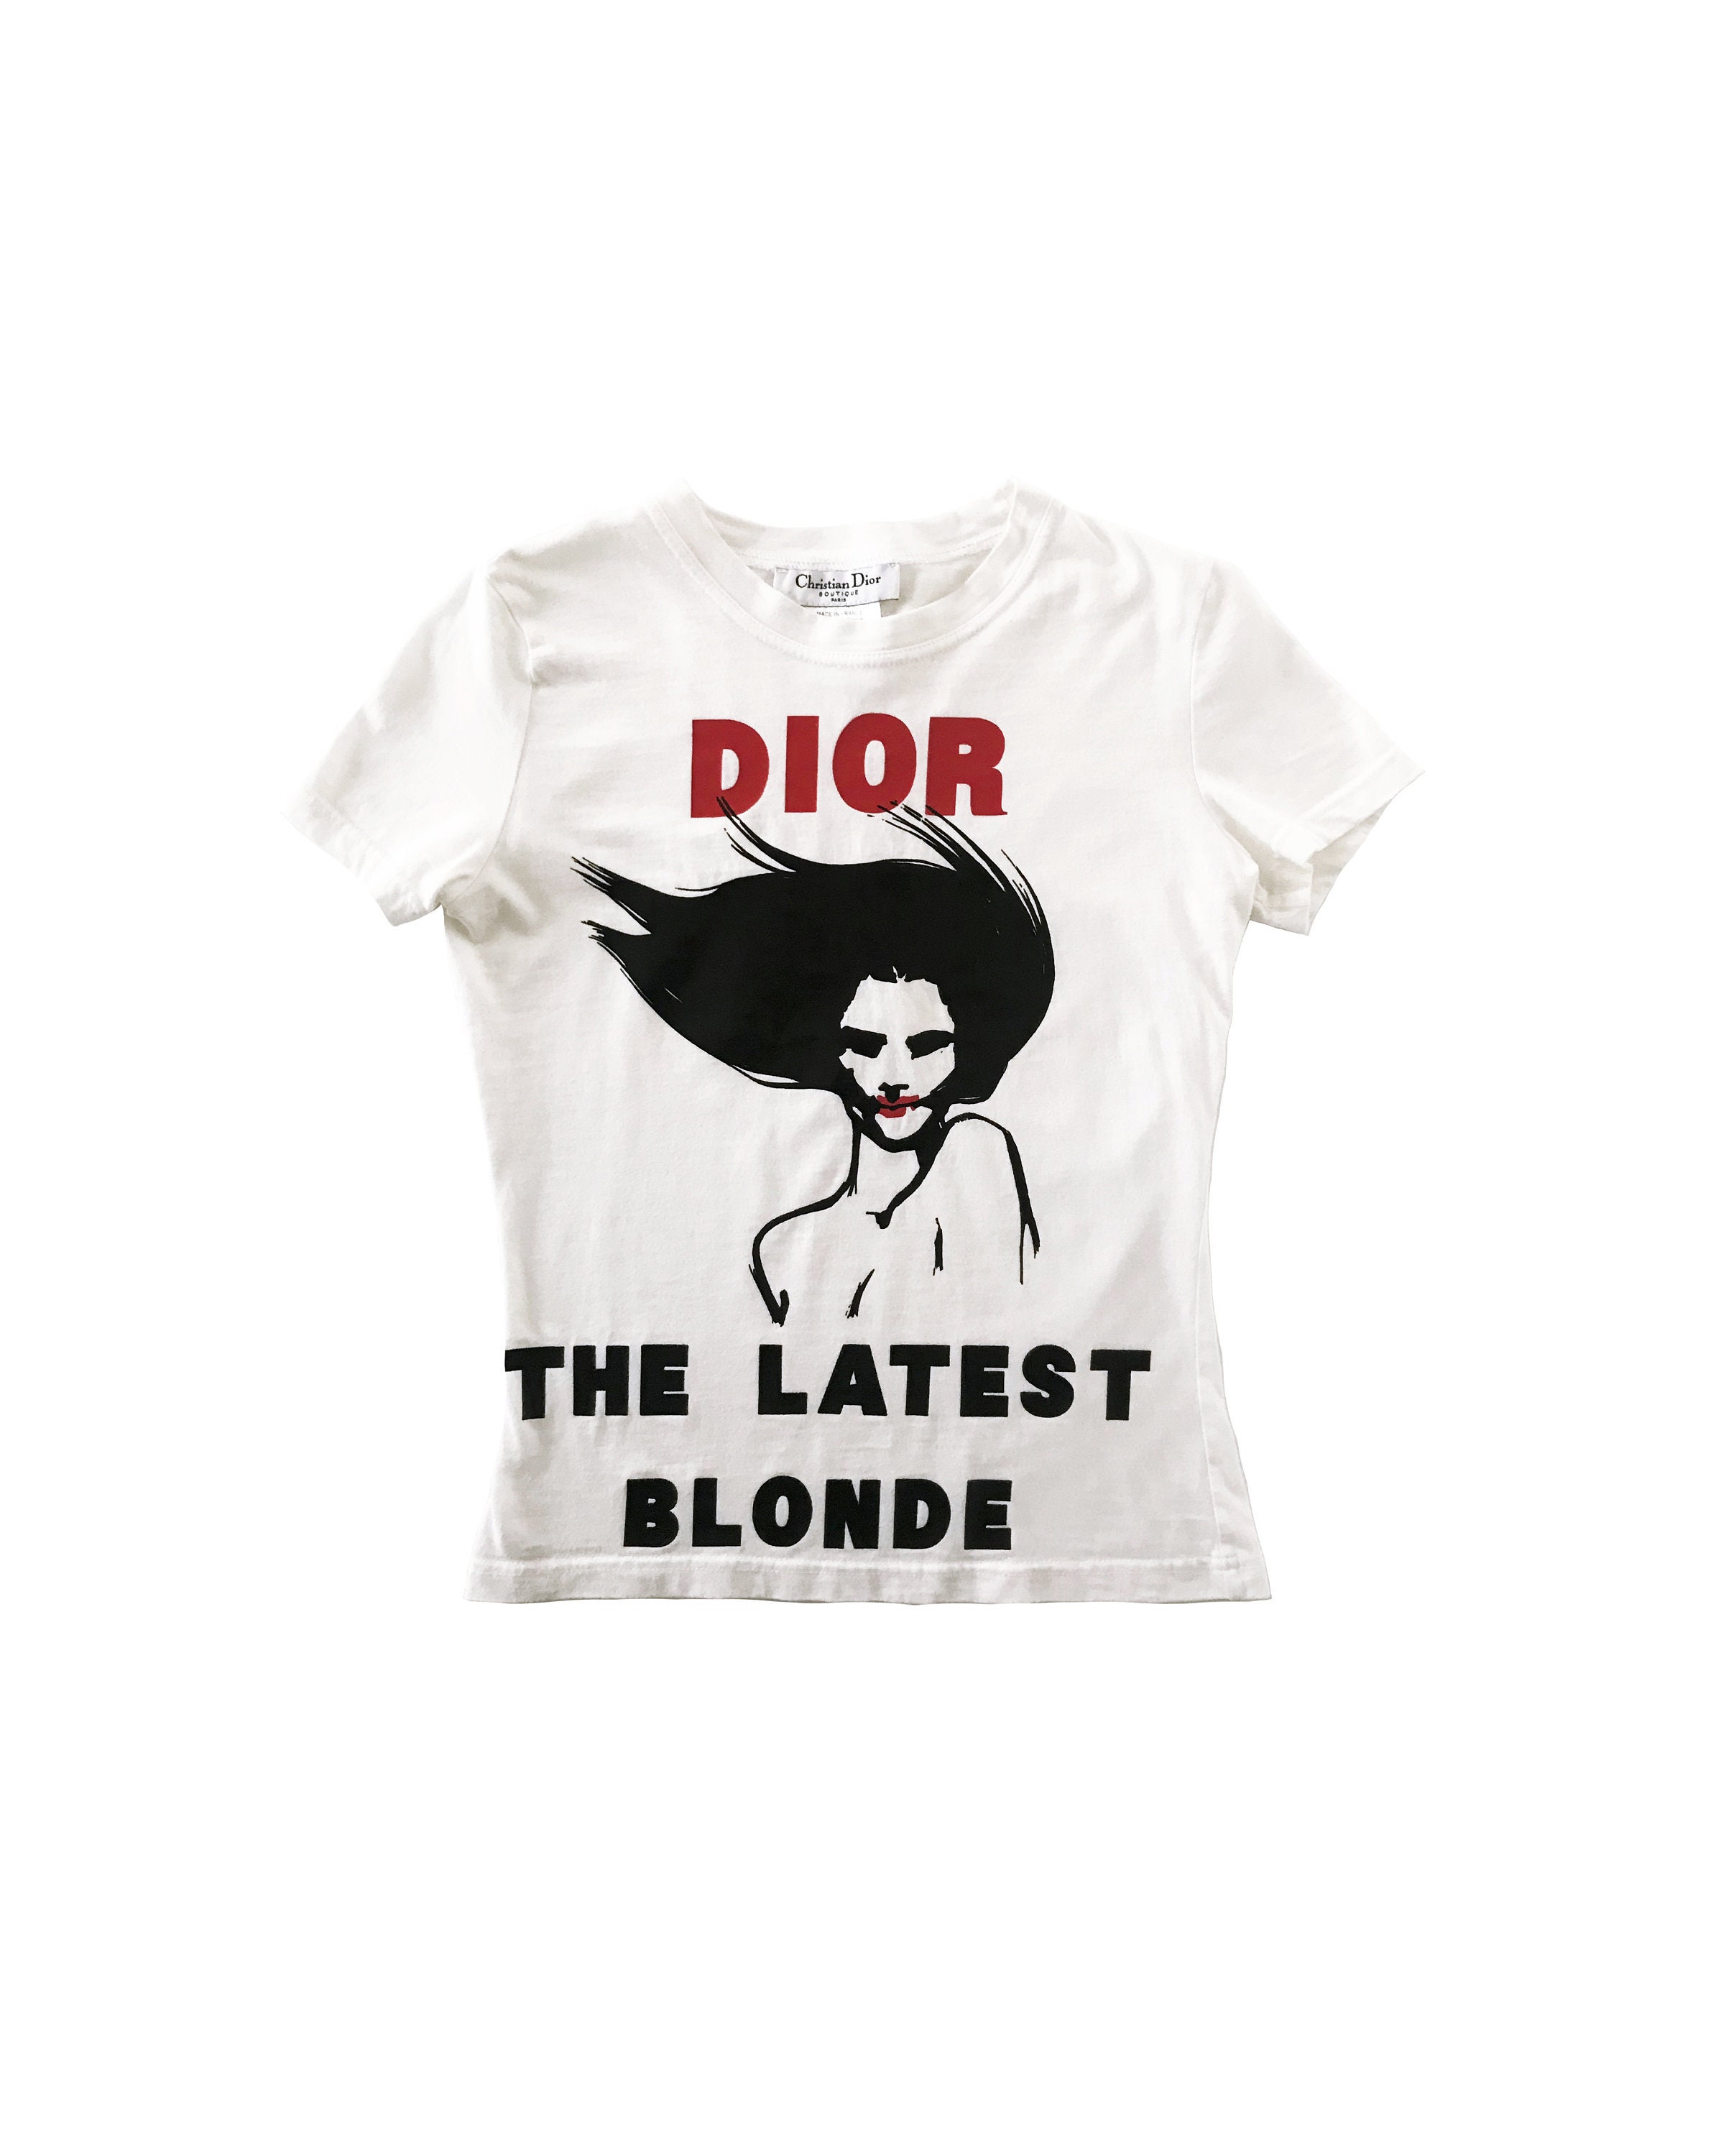 CHRISTIAN DIOR Vintage Logo Print the Latest Blonde T-shirt Top Tee - Etsy